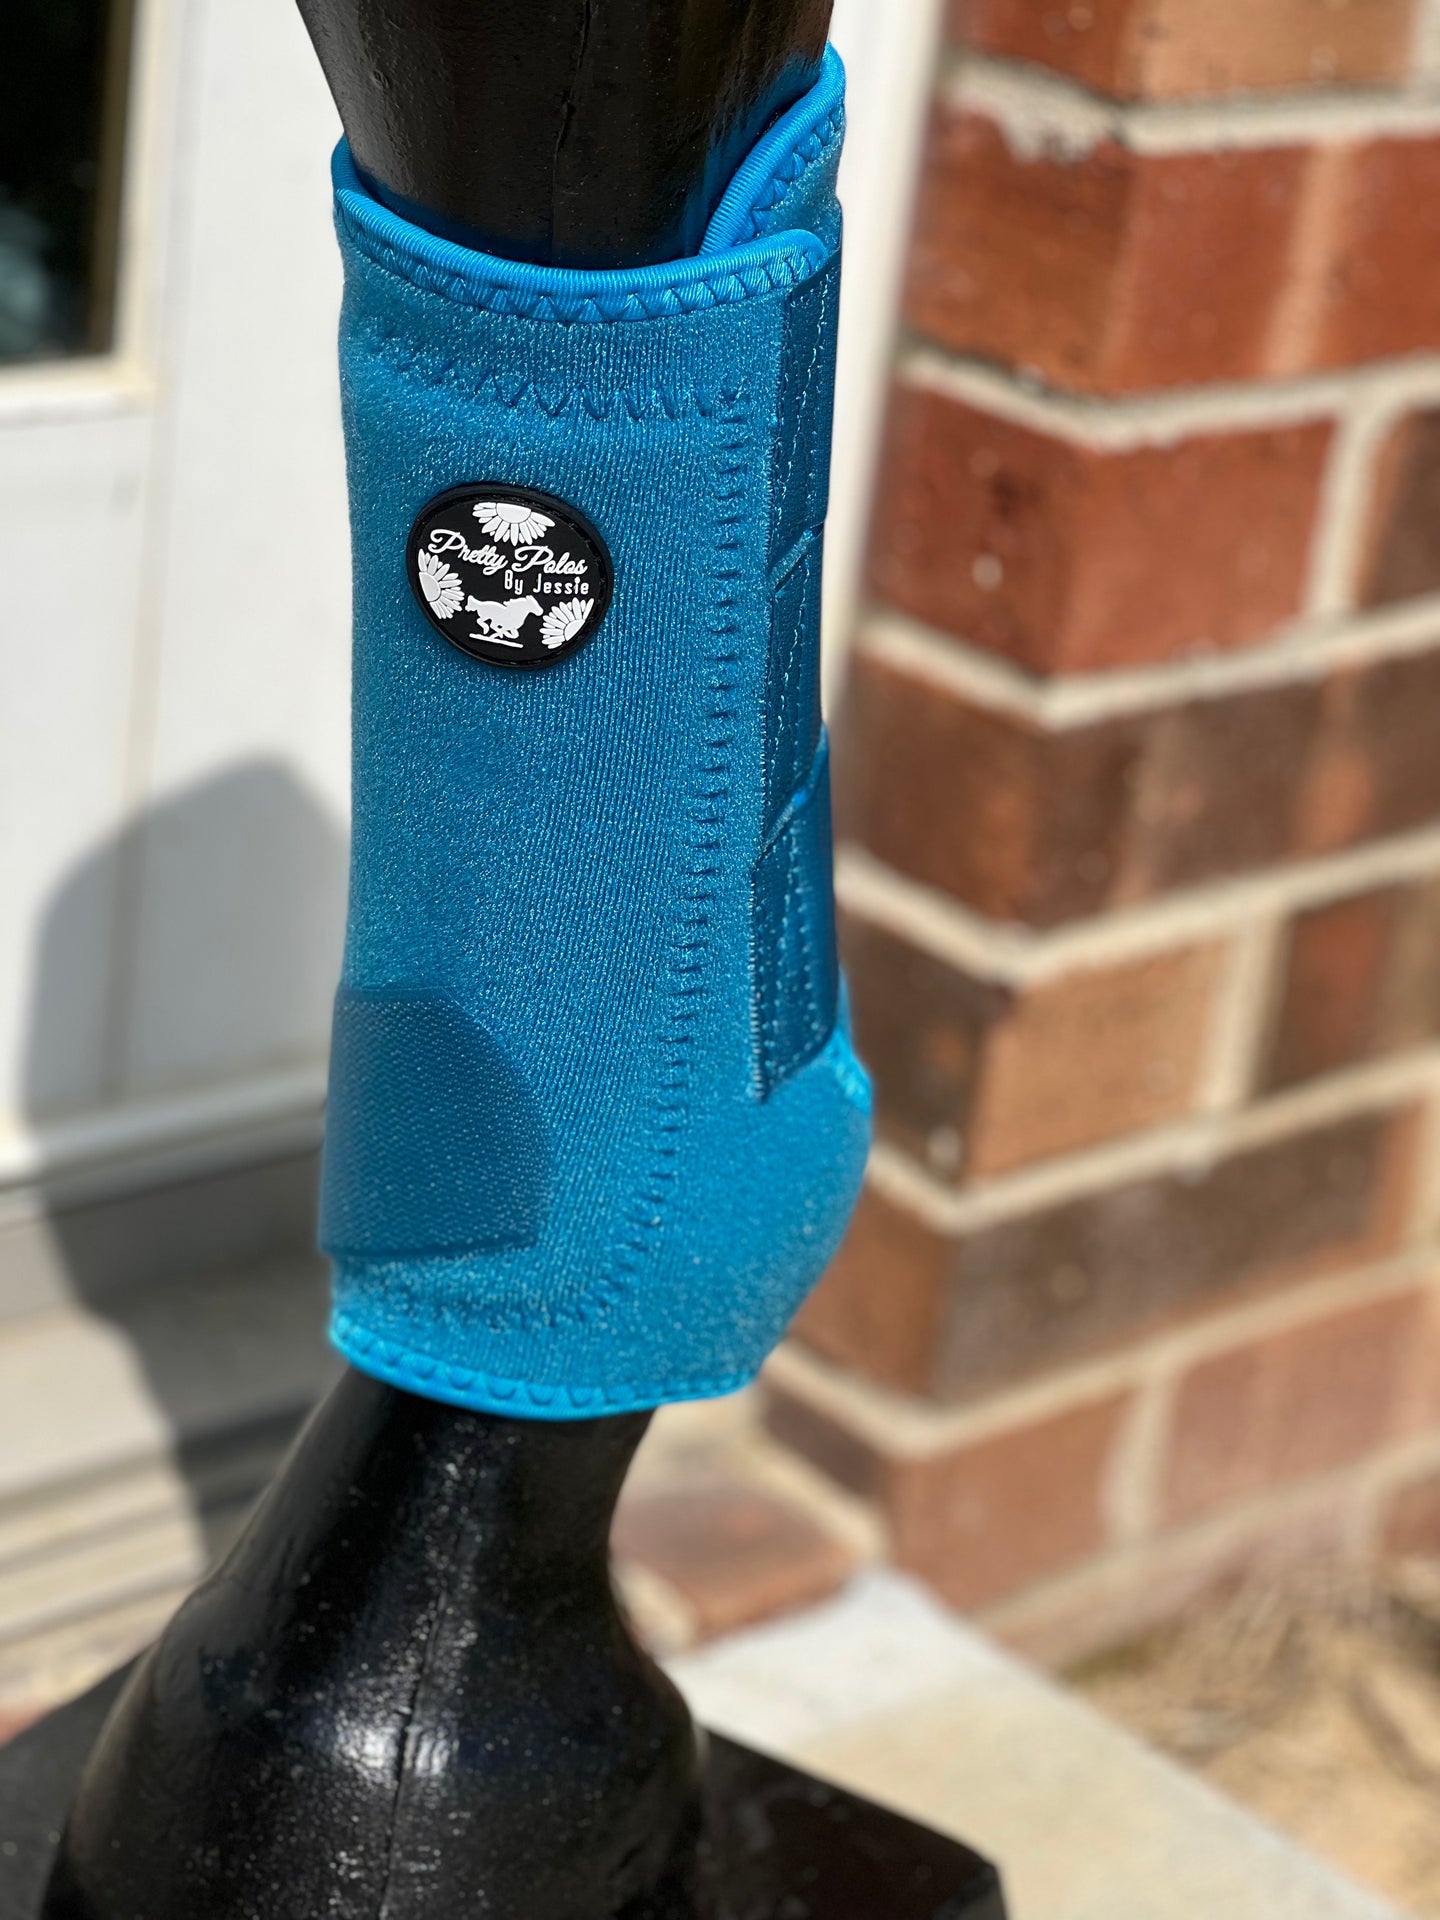 Turquoise Sport Boots